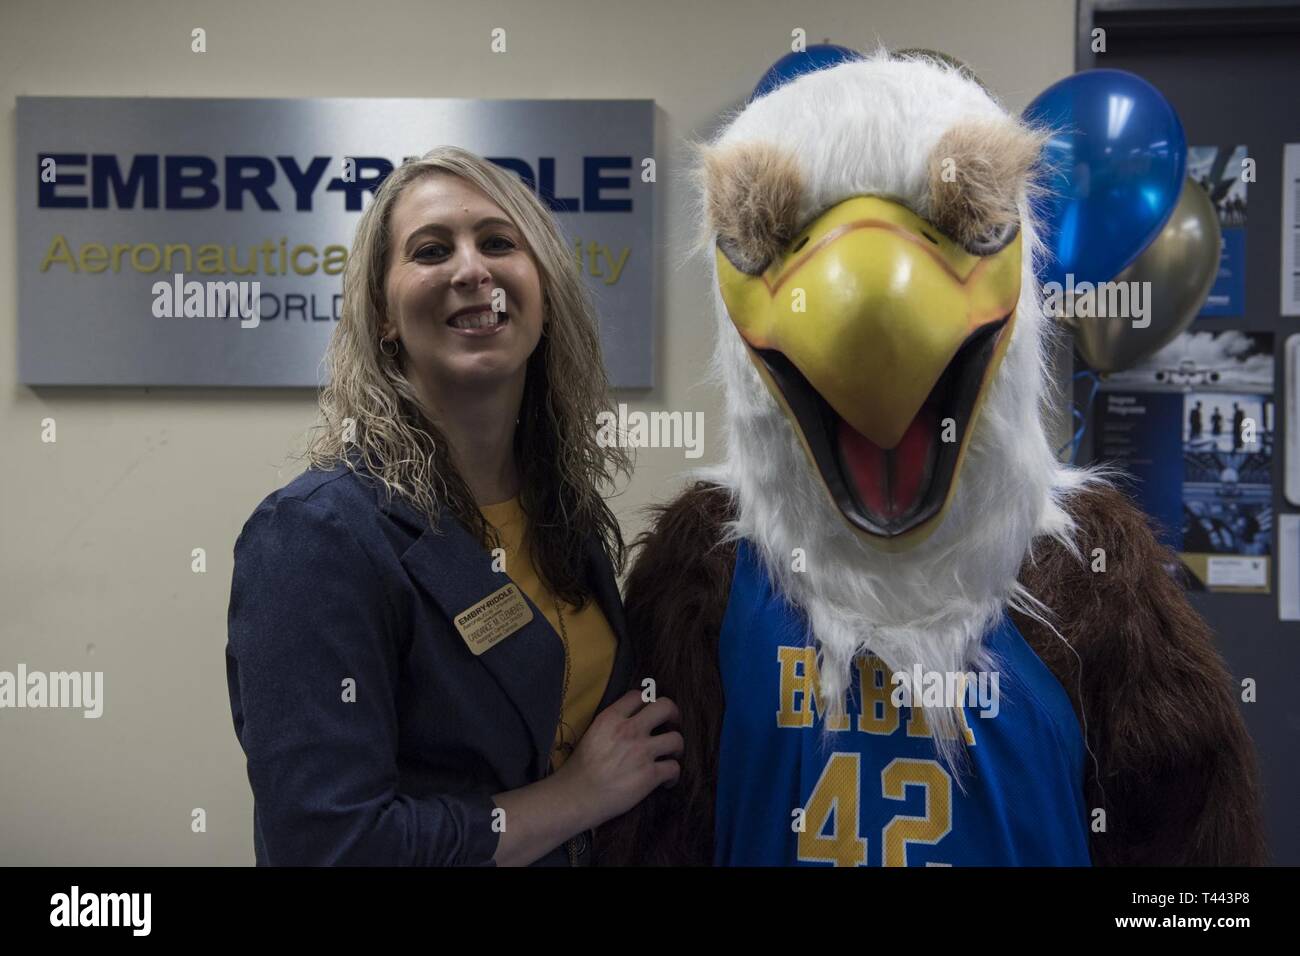 Candance Clements, left, the Misawa Embry-Riddle Aeronautical University assistant campus director, pauses for a photo during the ERAU grand re-opening with the school’s mascot, right, at Misawa Air Base, Japan, March 13, 2019. The institution offers nine-week courses focusing on aeronautics, aviation maintenance, aviation business administration, aviation security, unmanned systems applications and human factors. Stock Photo